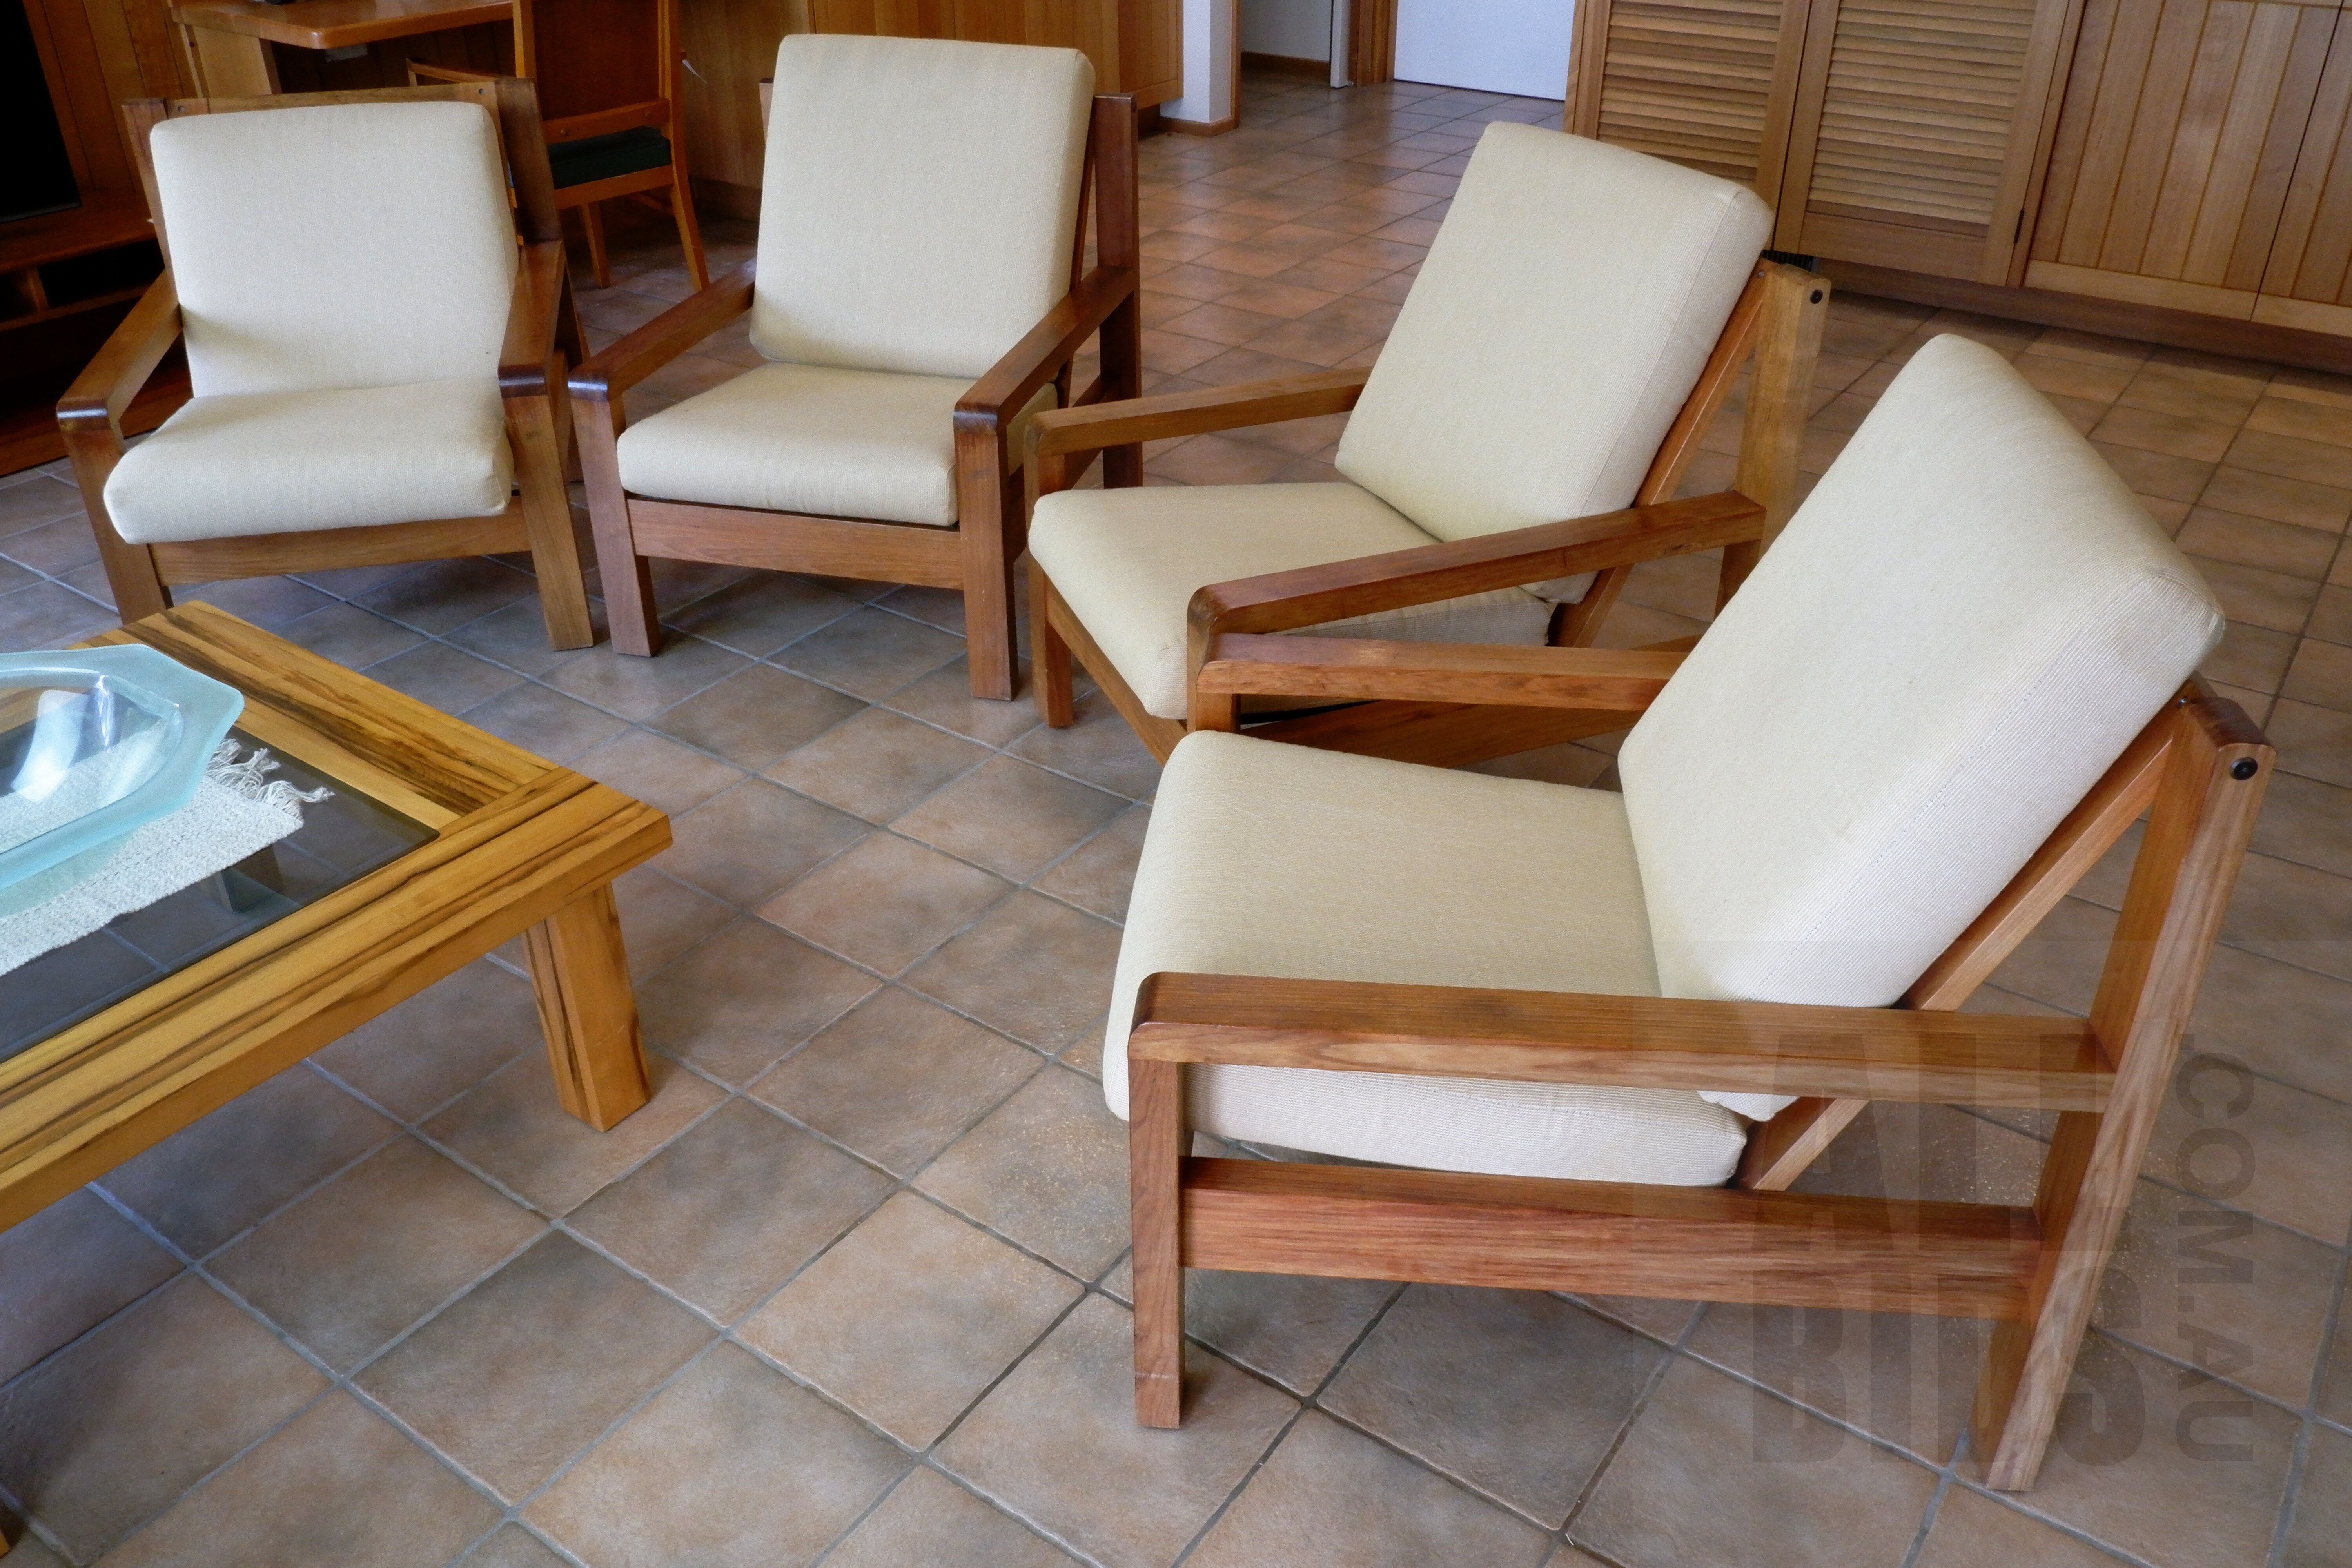 'Four Tasmanian Blackwood Armchairs Made by Pipers Truline'